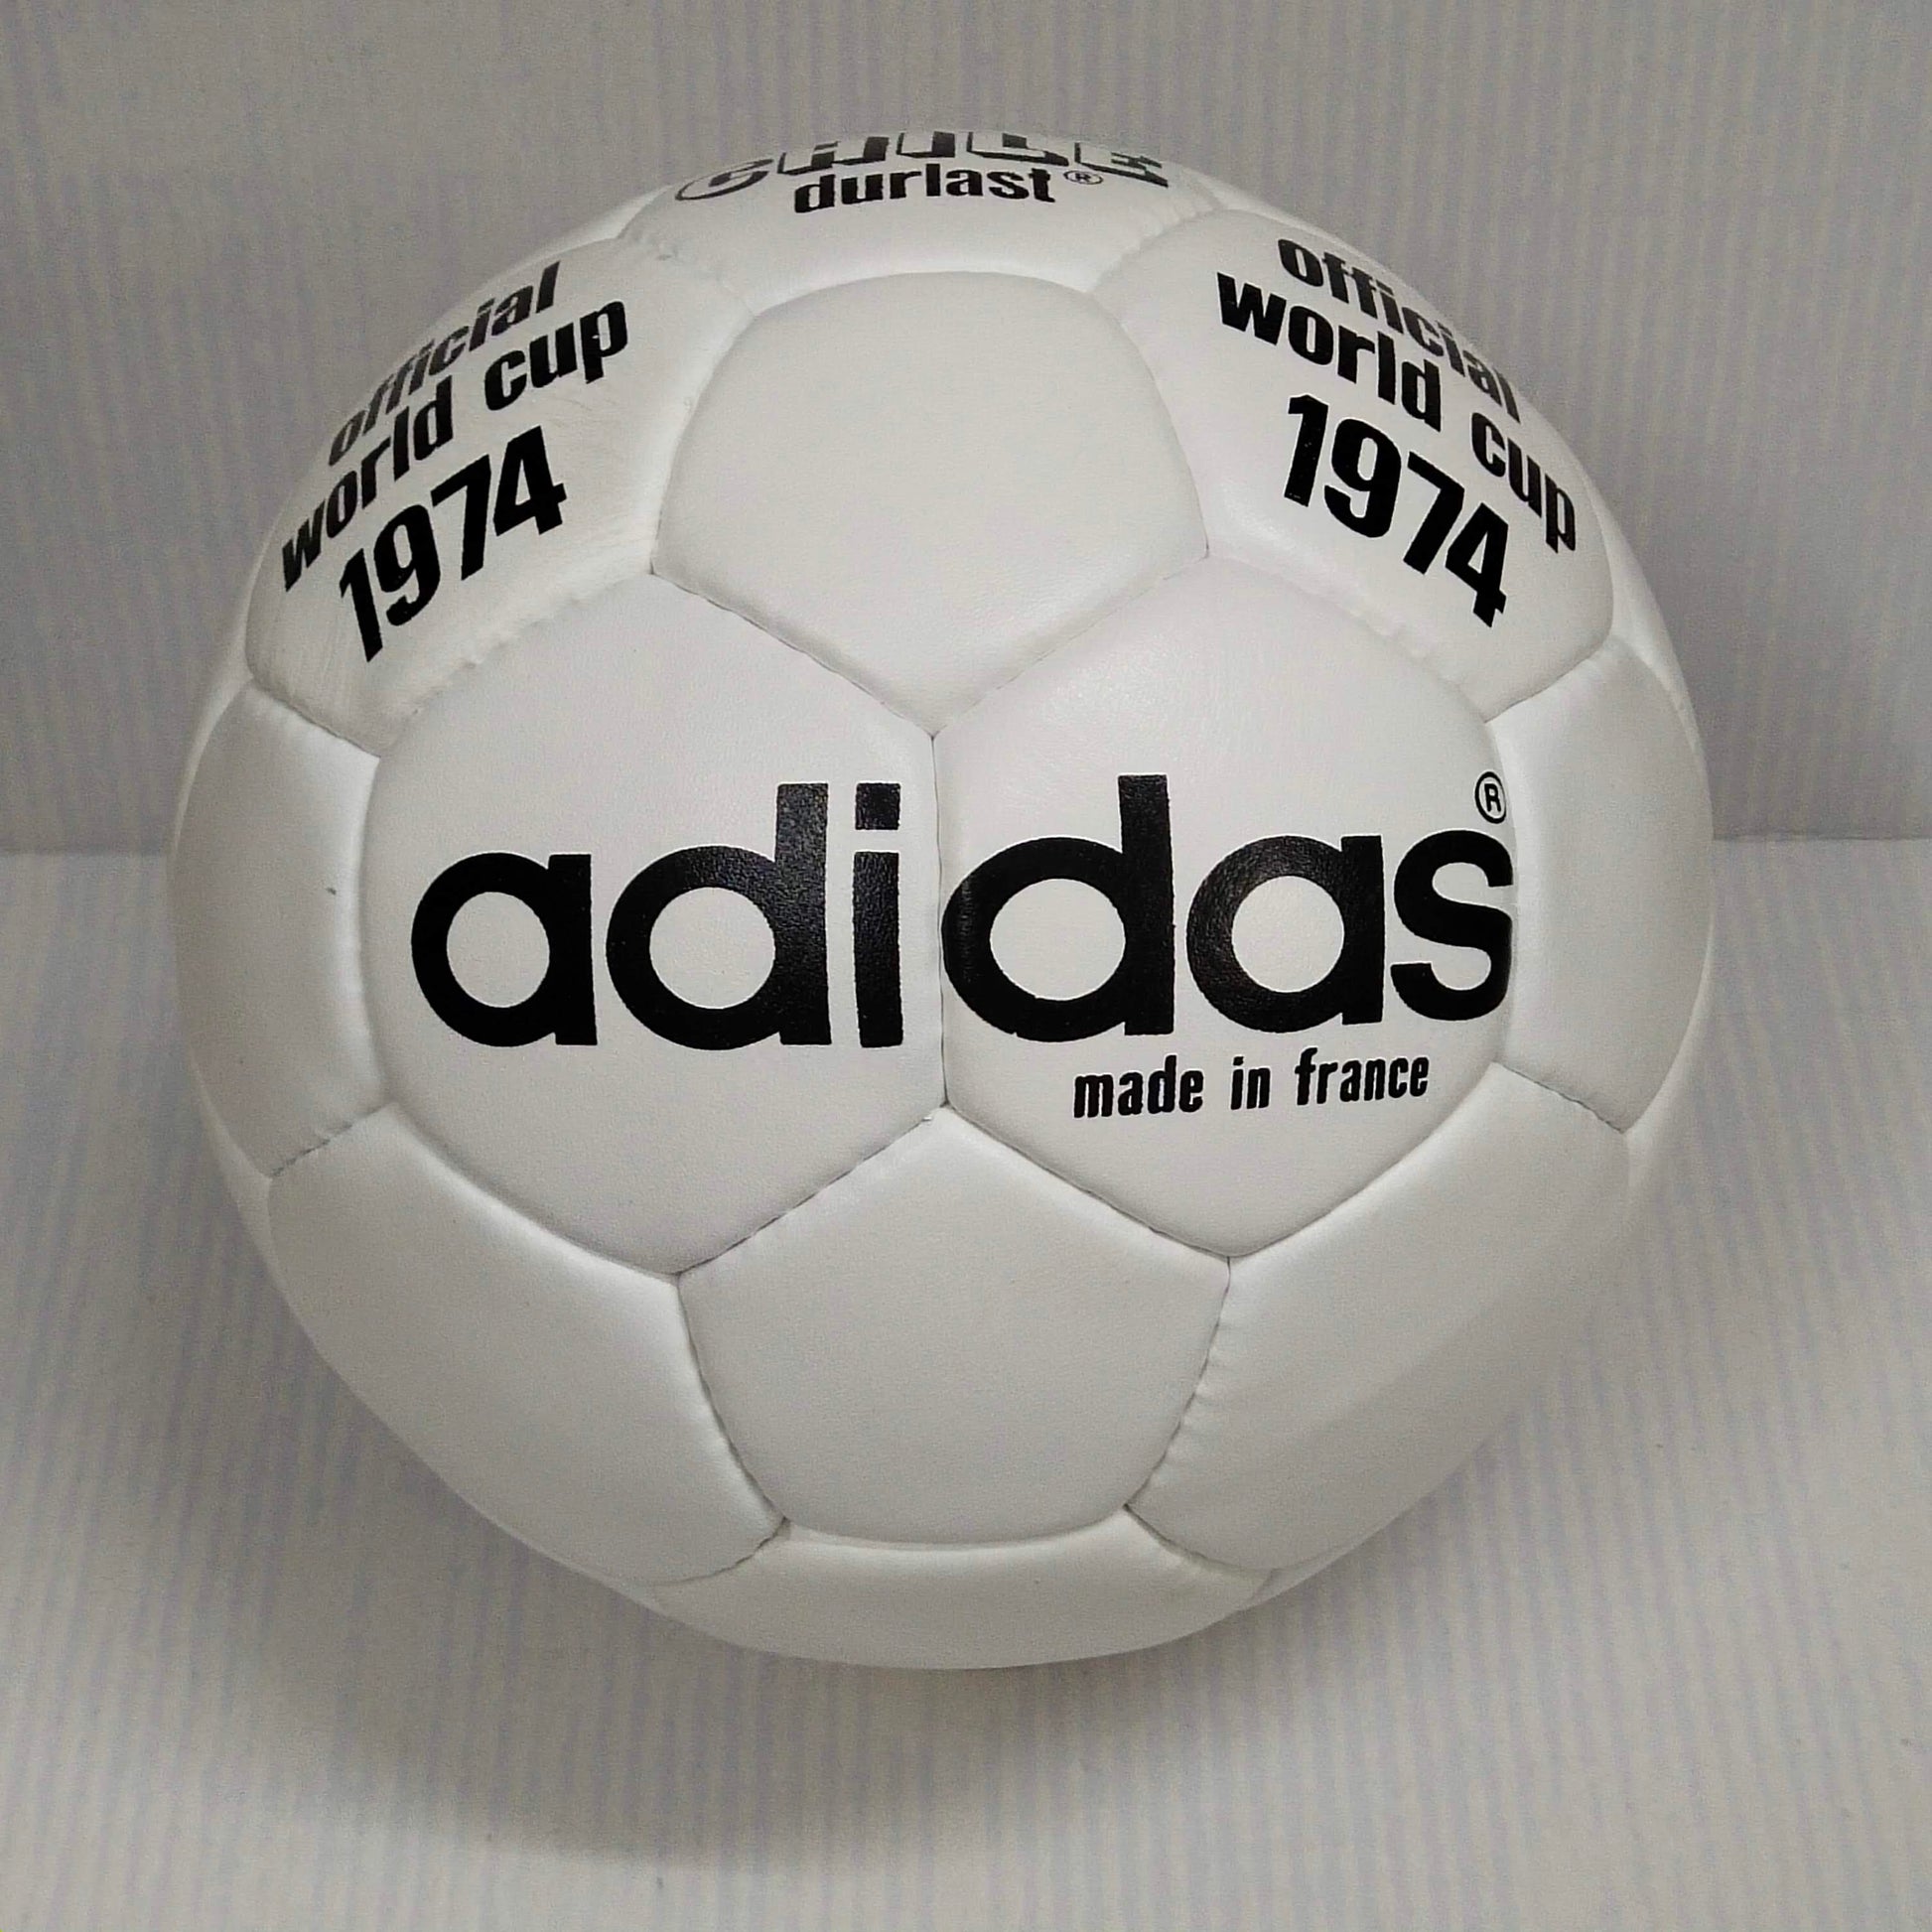 Adidas Chile Durlast | 1974 | FIFA World Cup Ball | Genuine Leather | SIZE 5 03